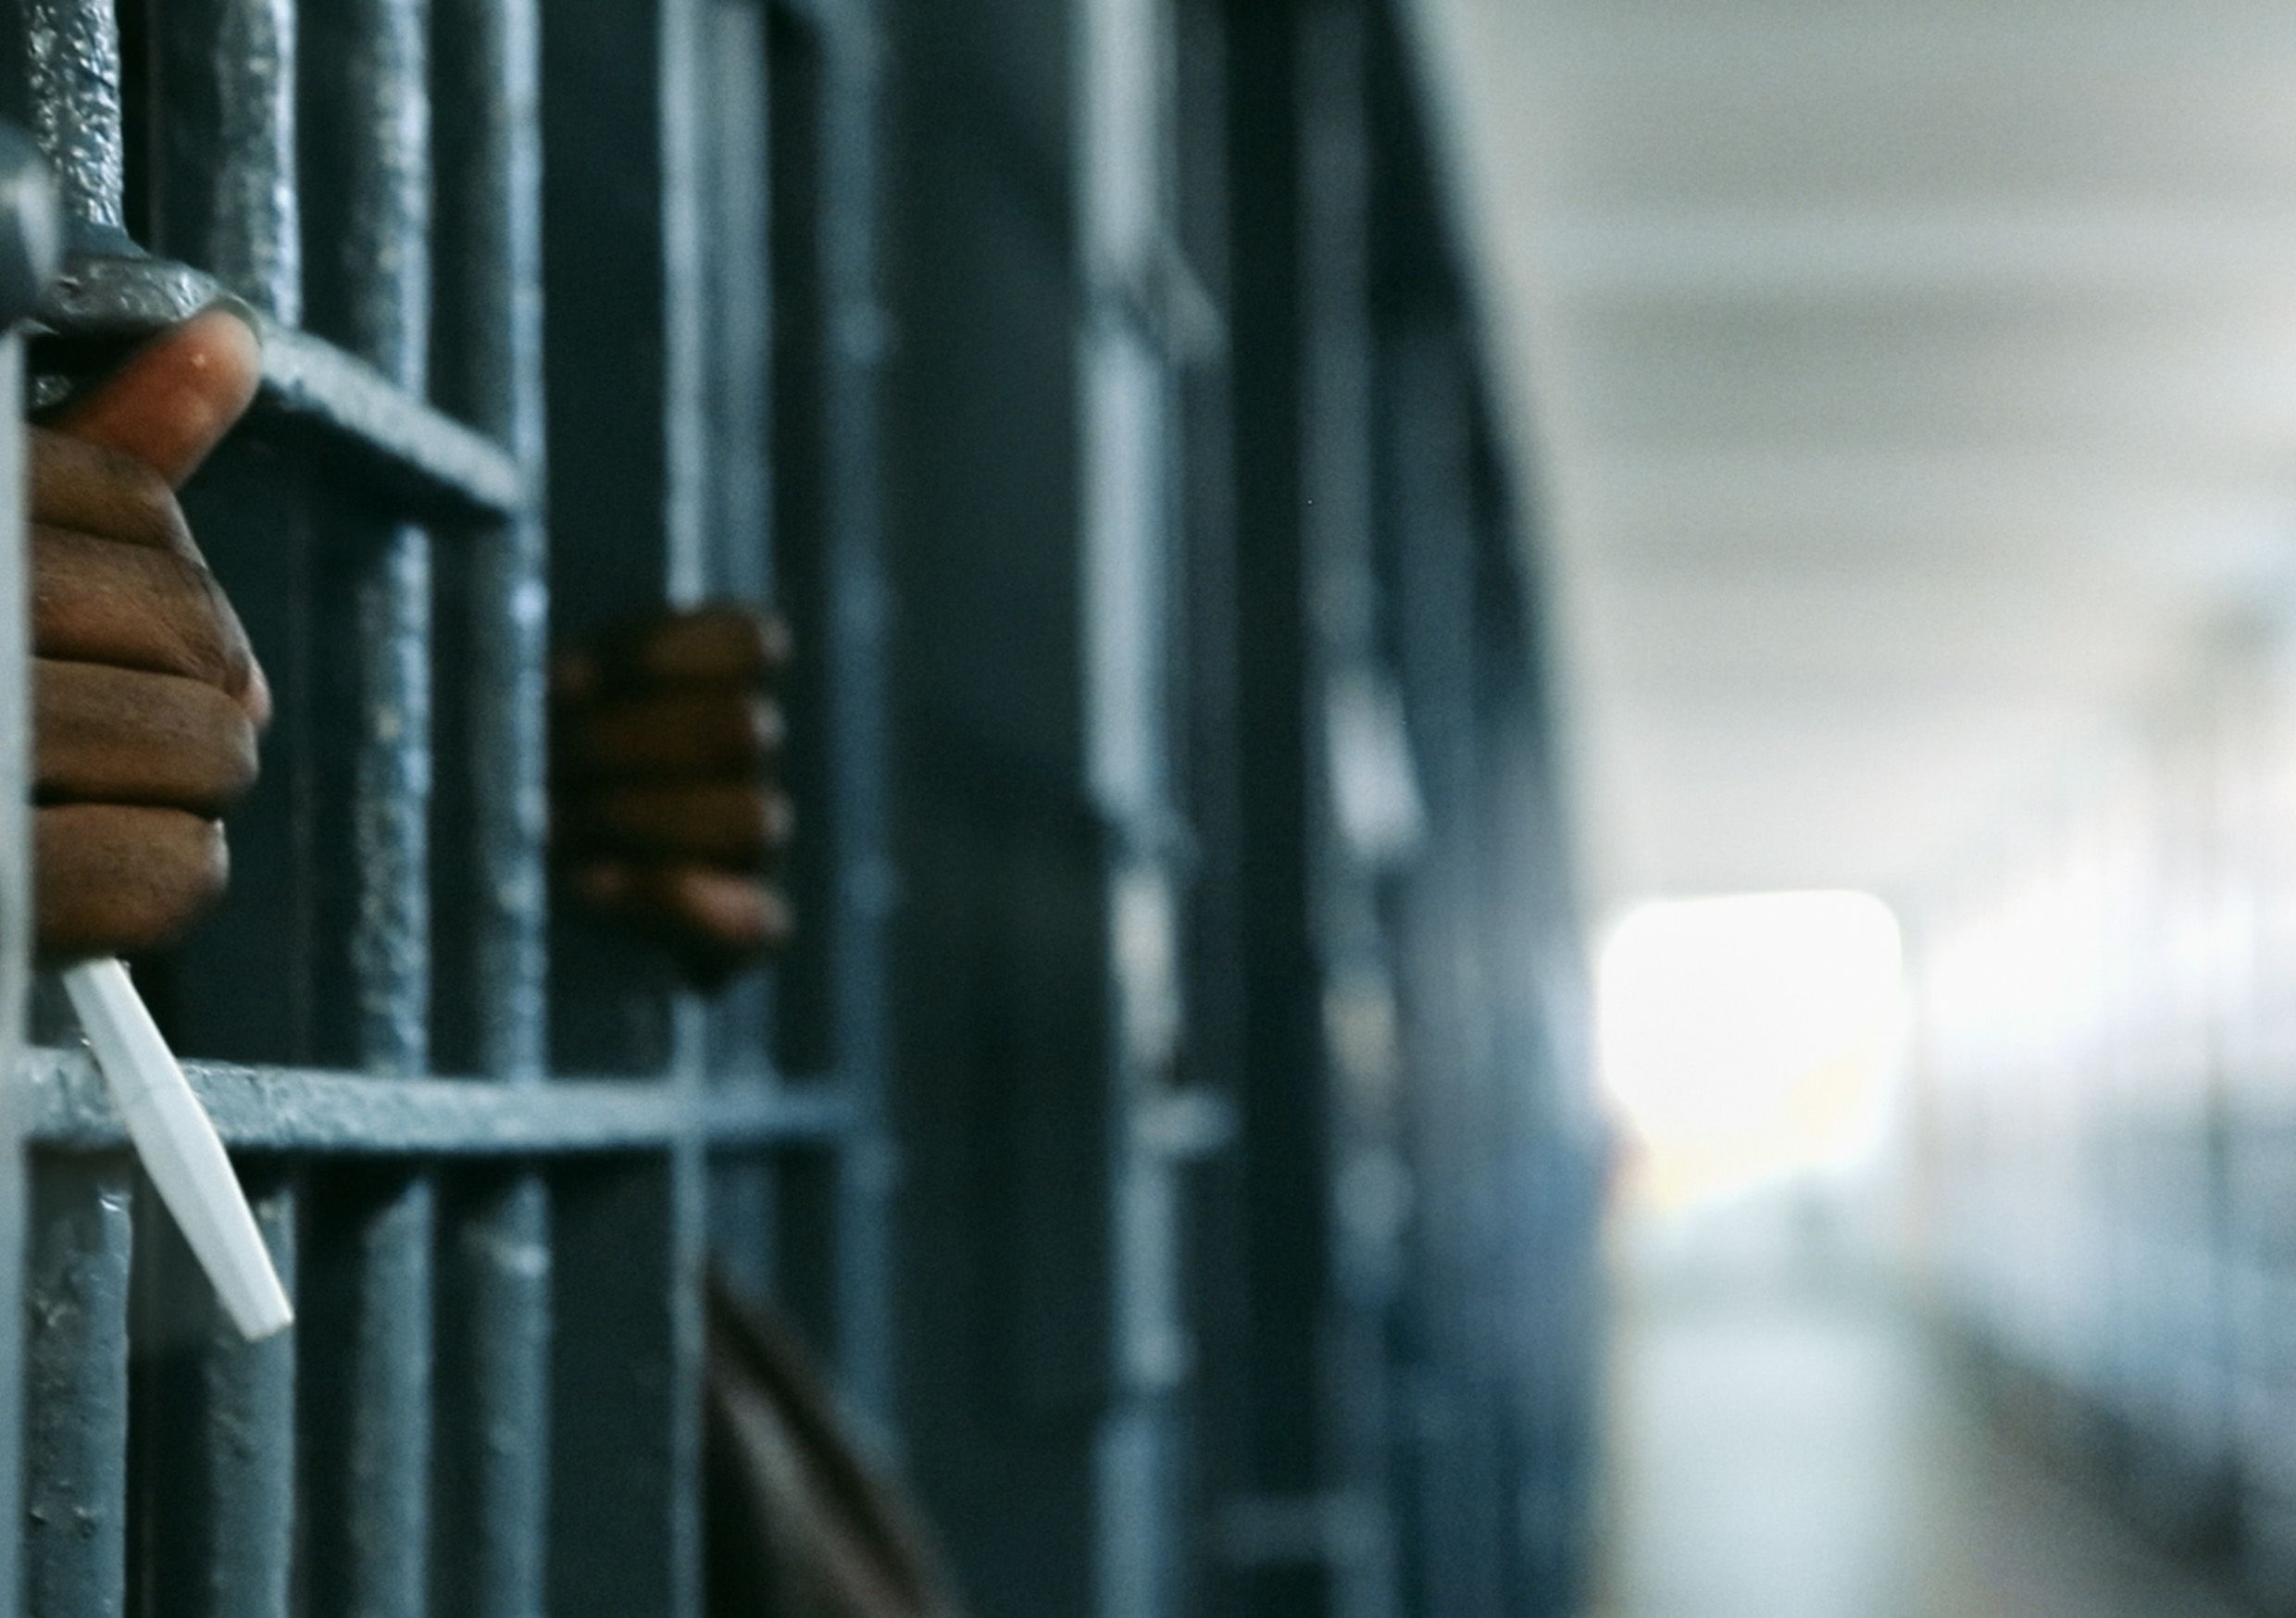 ACLU Report: Pay To Stay Jail Fees Amount To Debtors' Prison